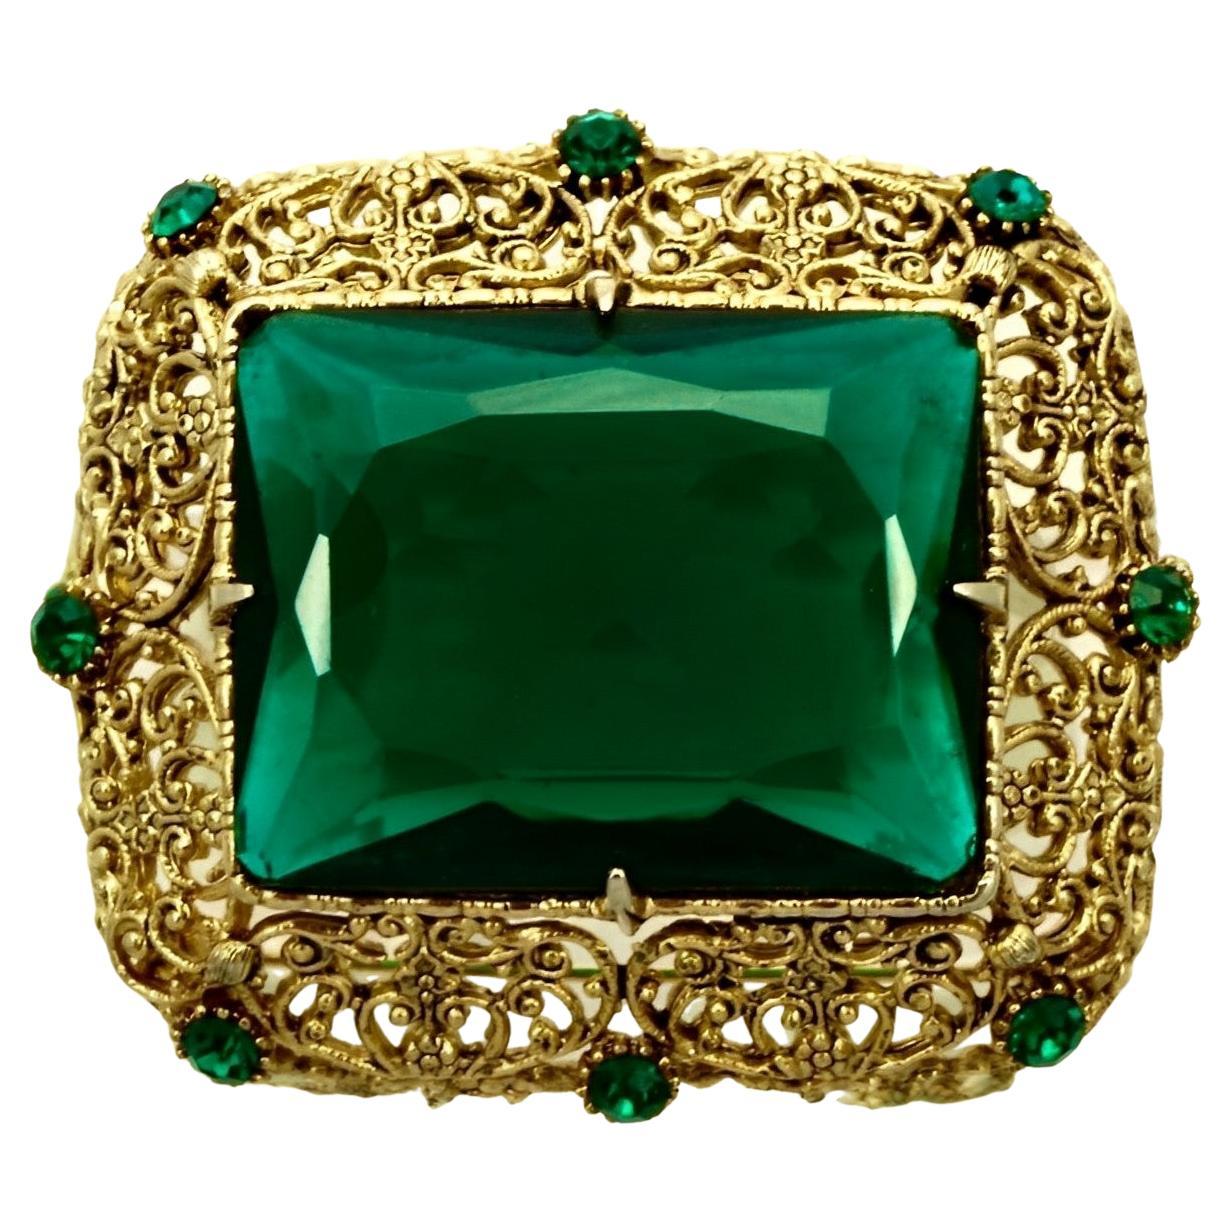 Gold Plated Filigree and Emerald Green Glass Statement Brooch circa 1960s